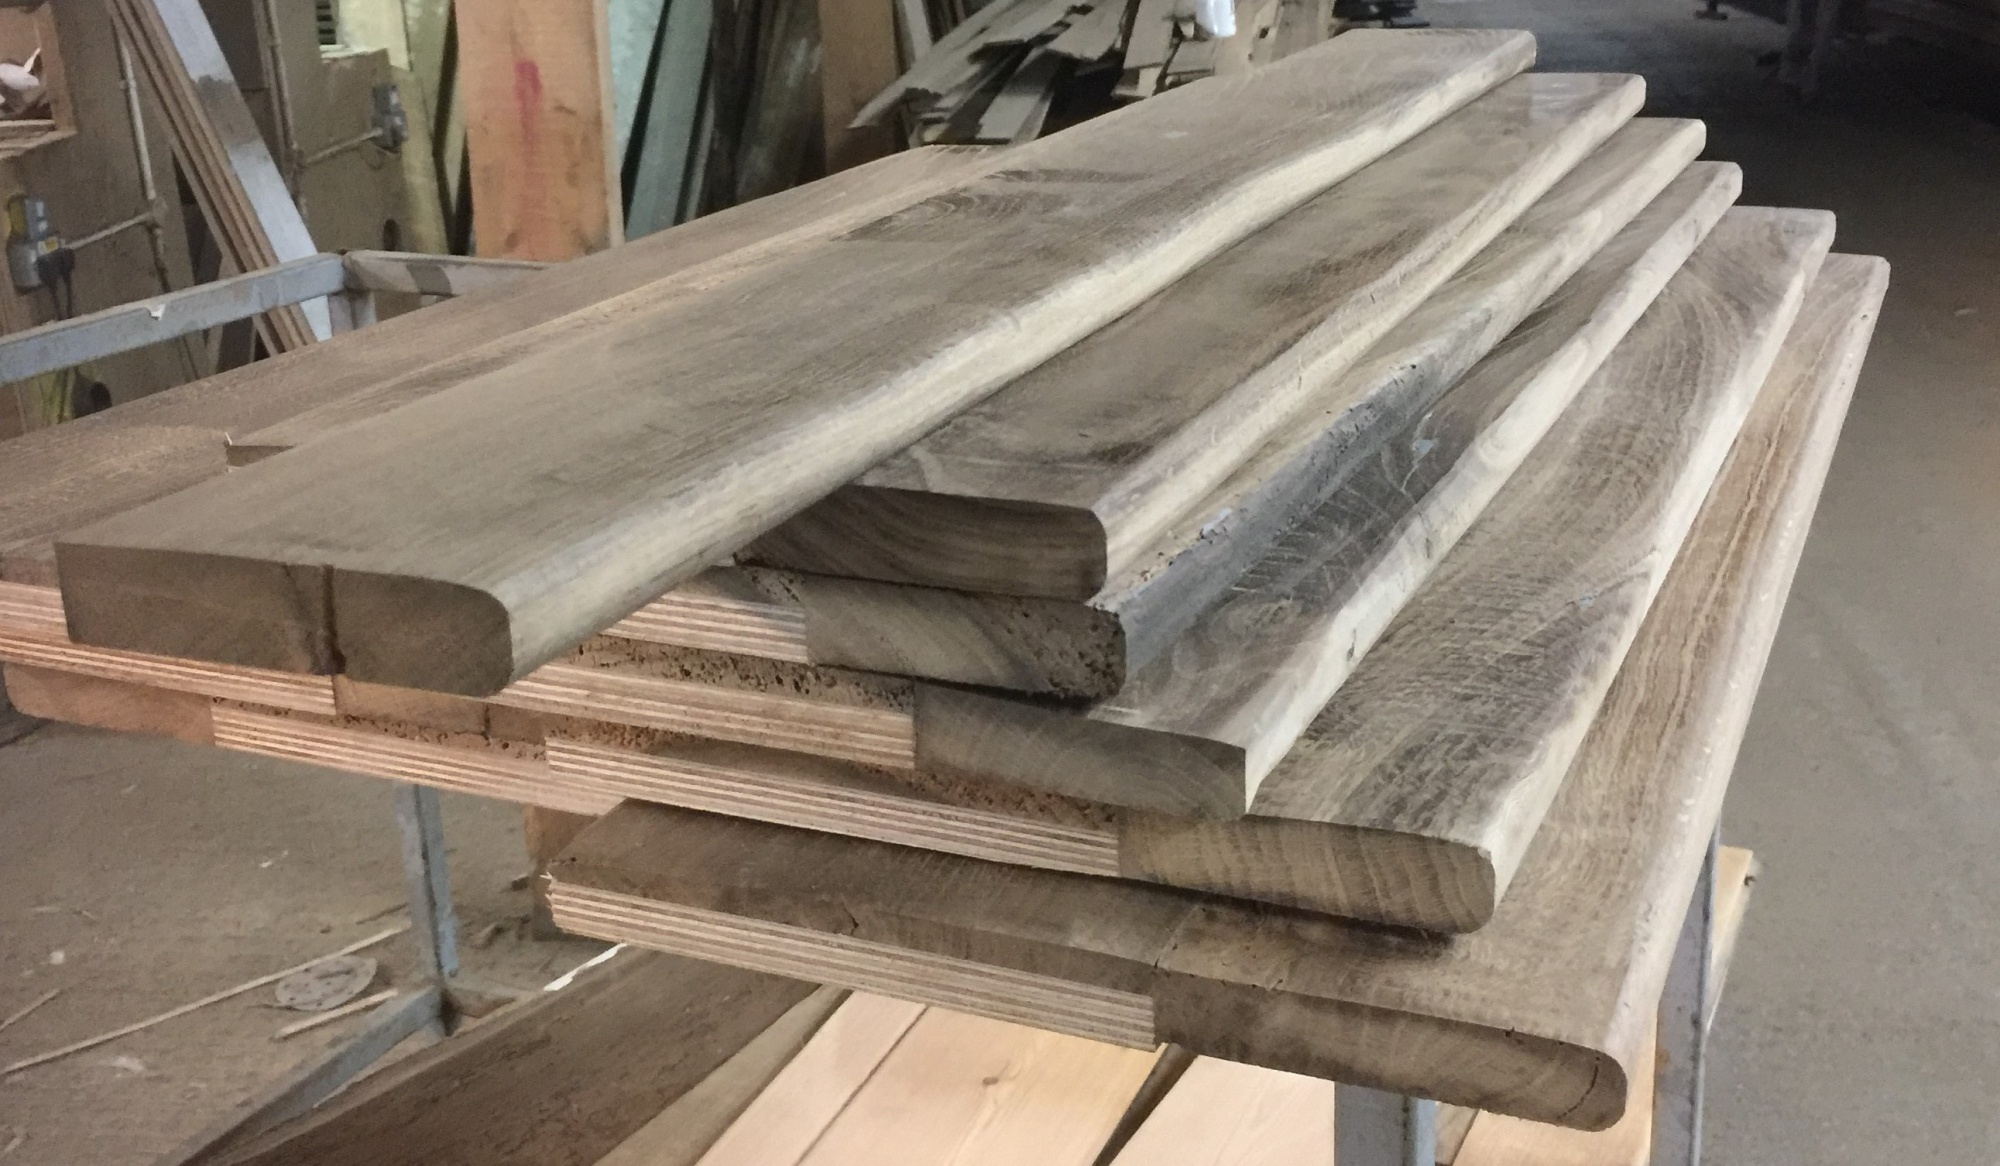 Antique Stair Parts from Reclaimed Wood